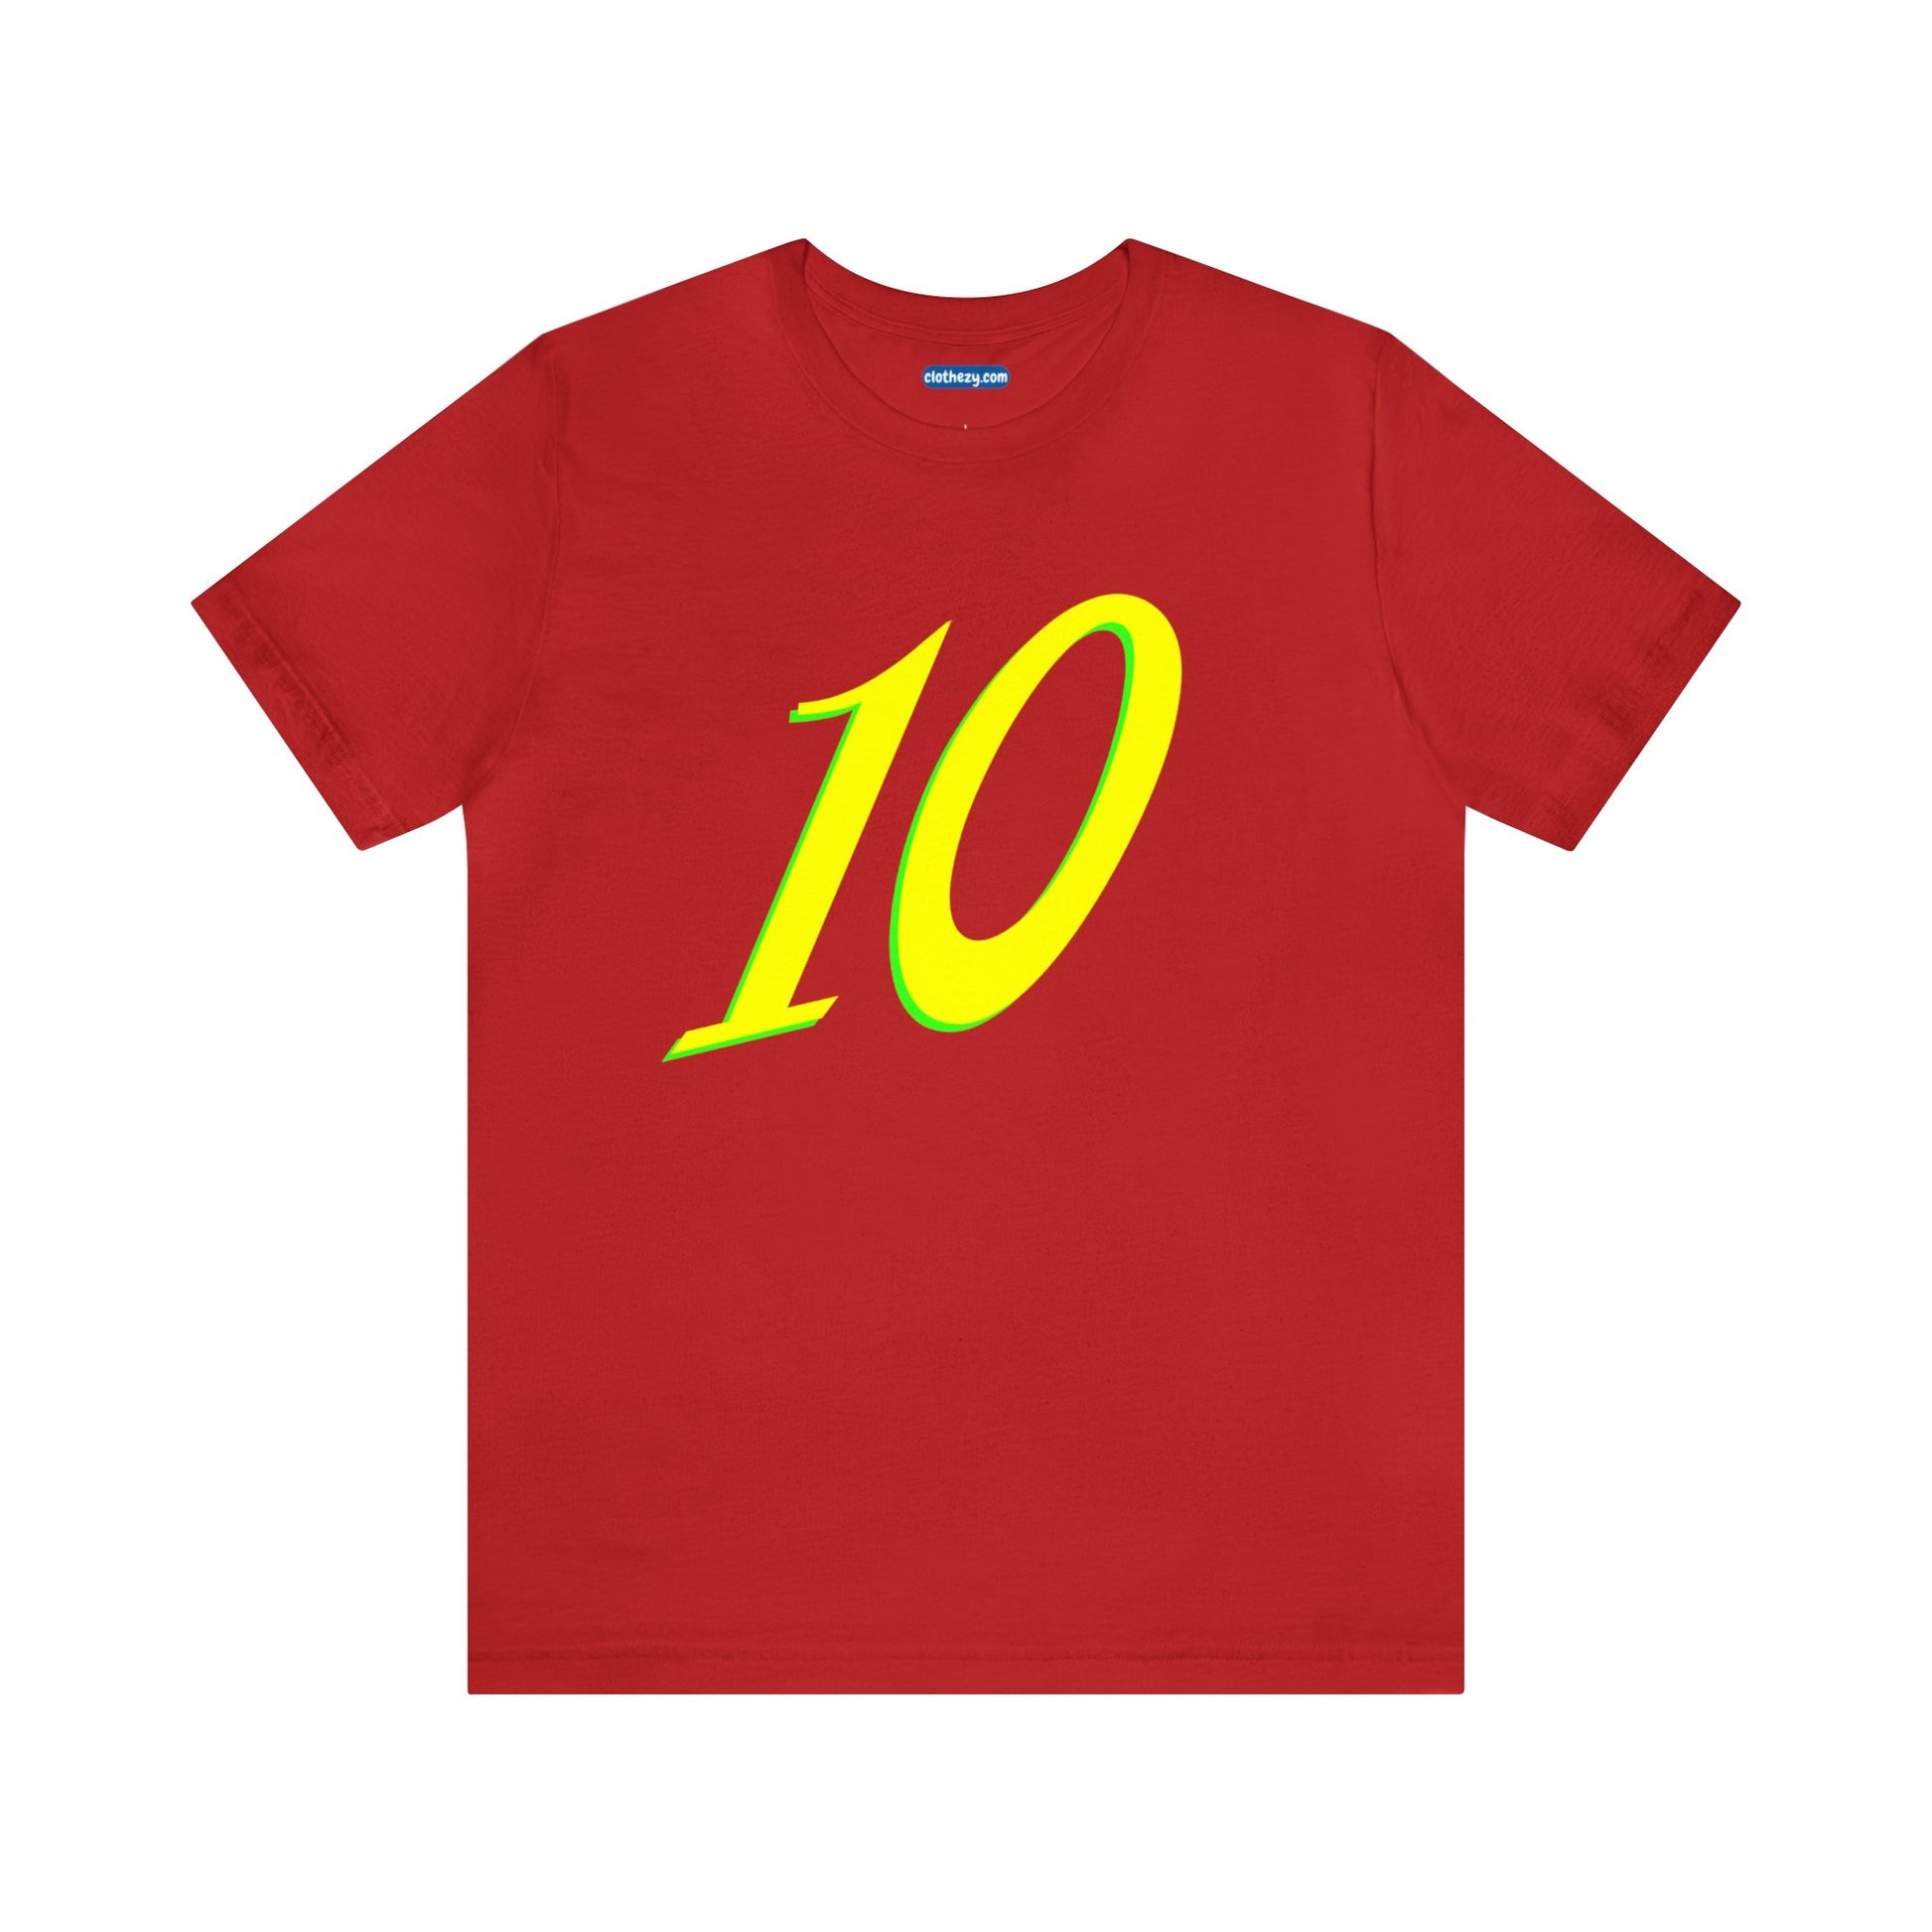 Number 10 Design - Soft Cotton Tee for birthdays and celebrations, Gift for friends and family, Multiple Options by clothezy.com in Red Size Small - Buy Now